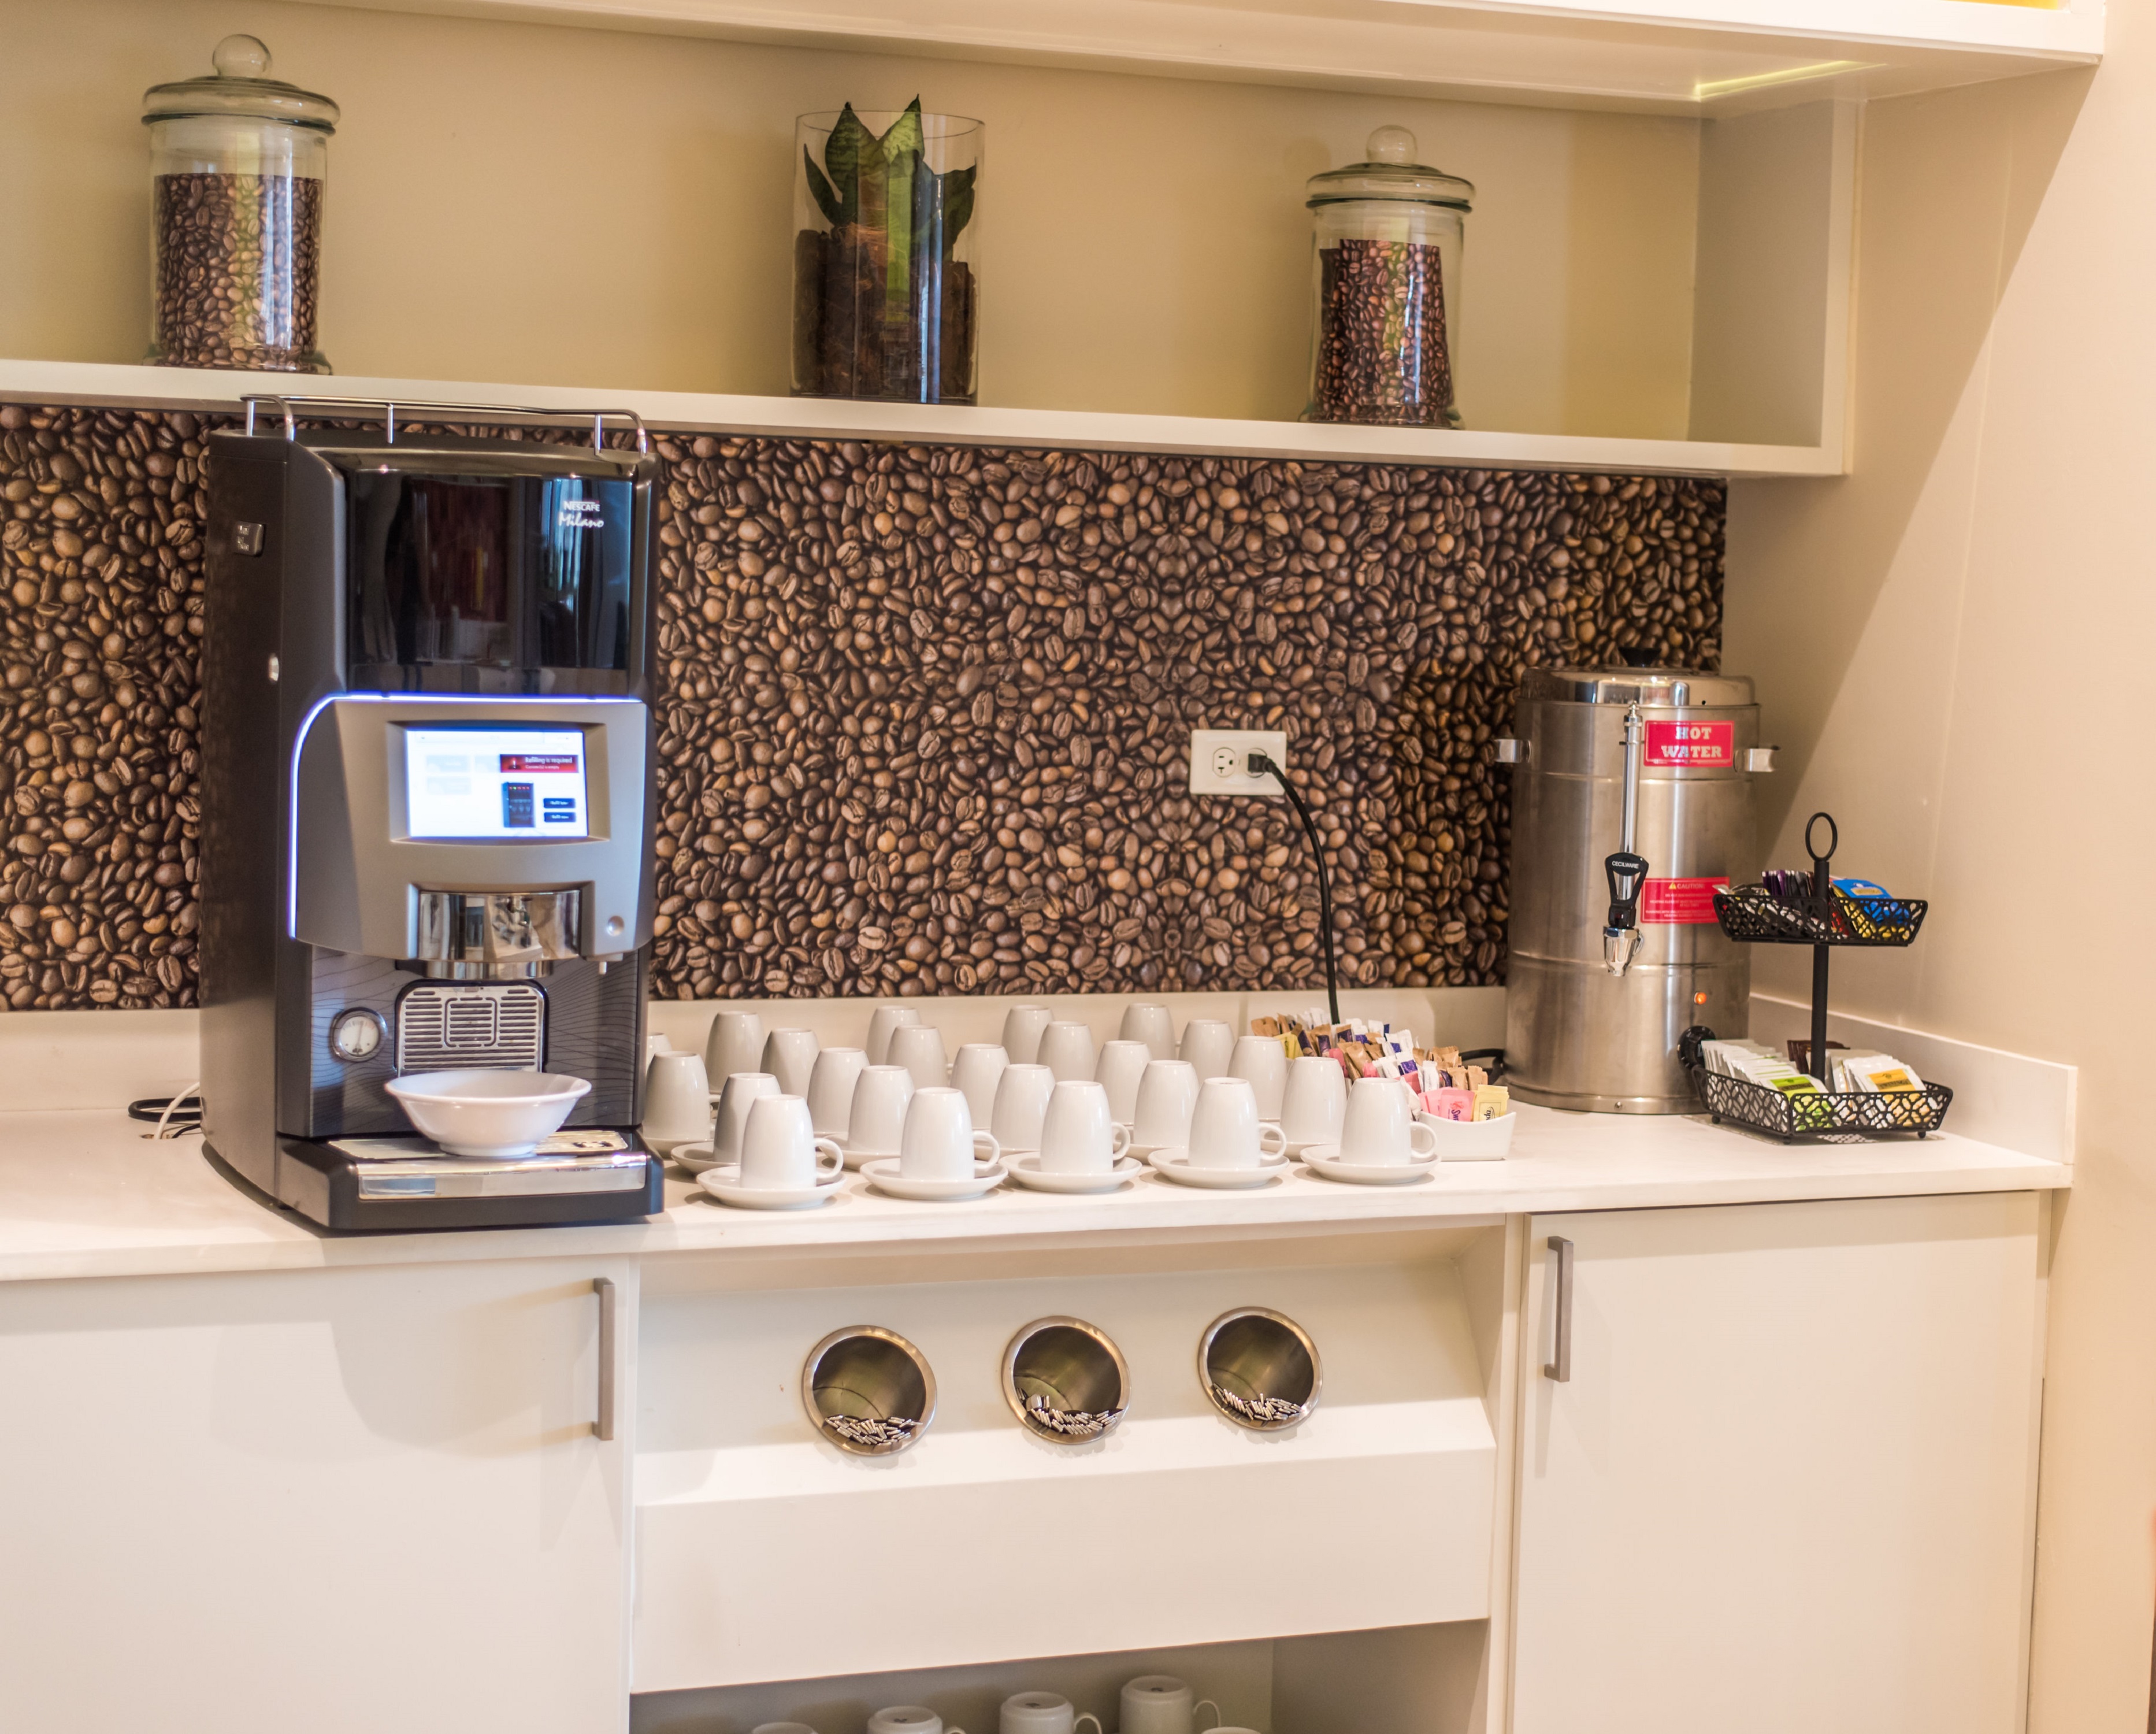 Breakfast Counter with Coffee Machine